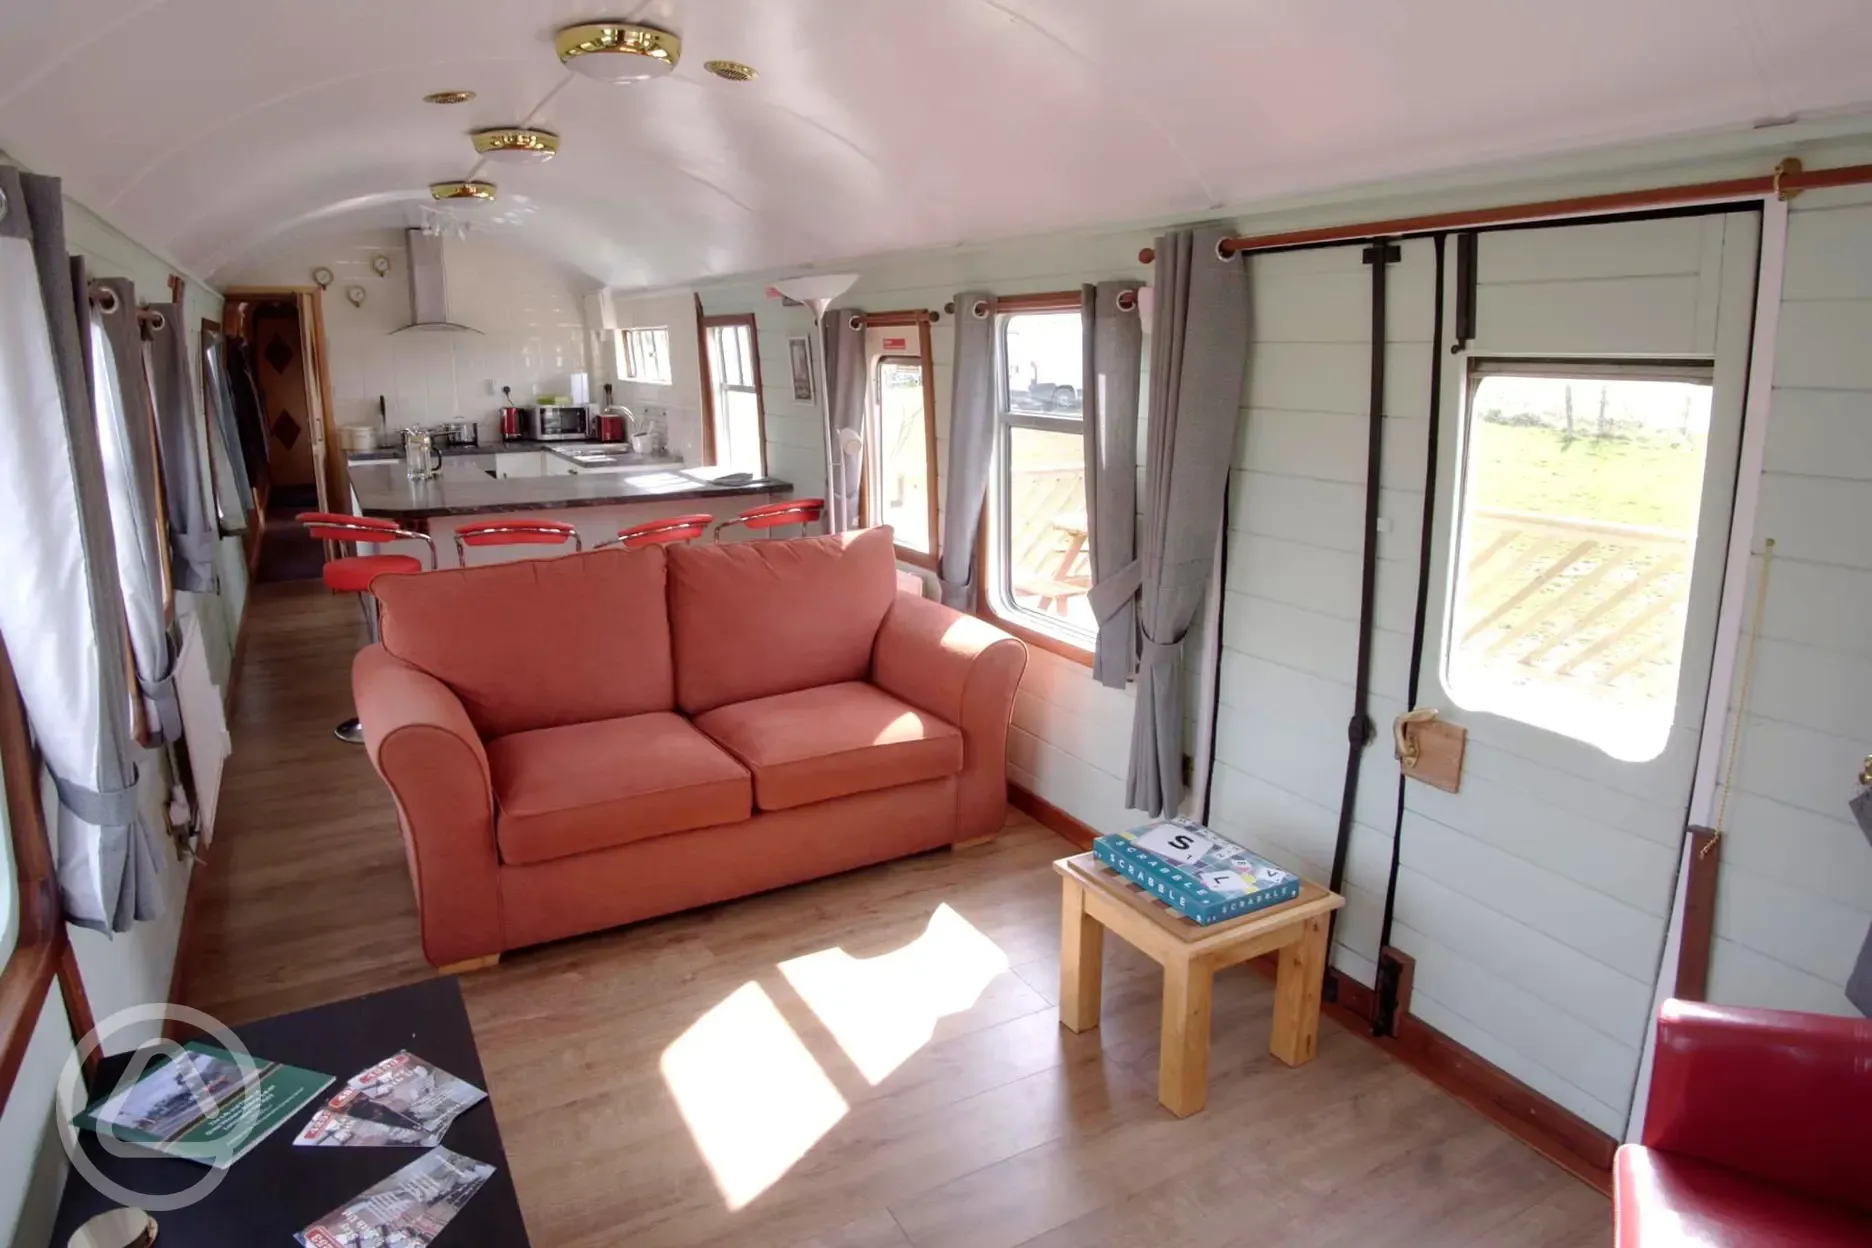 Interior of glamping coach living area